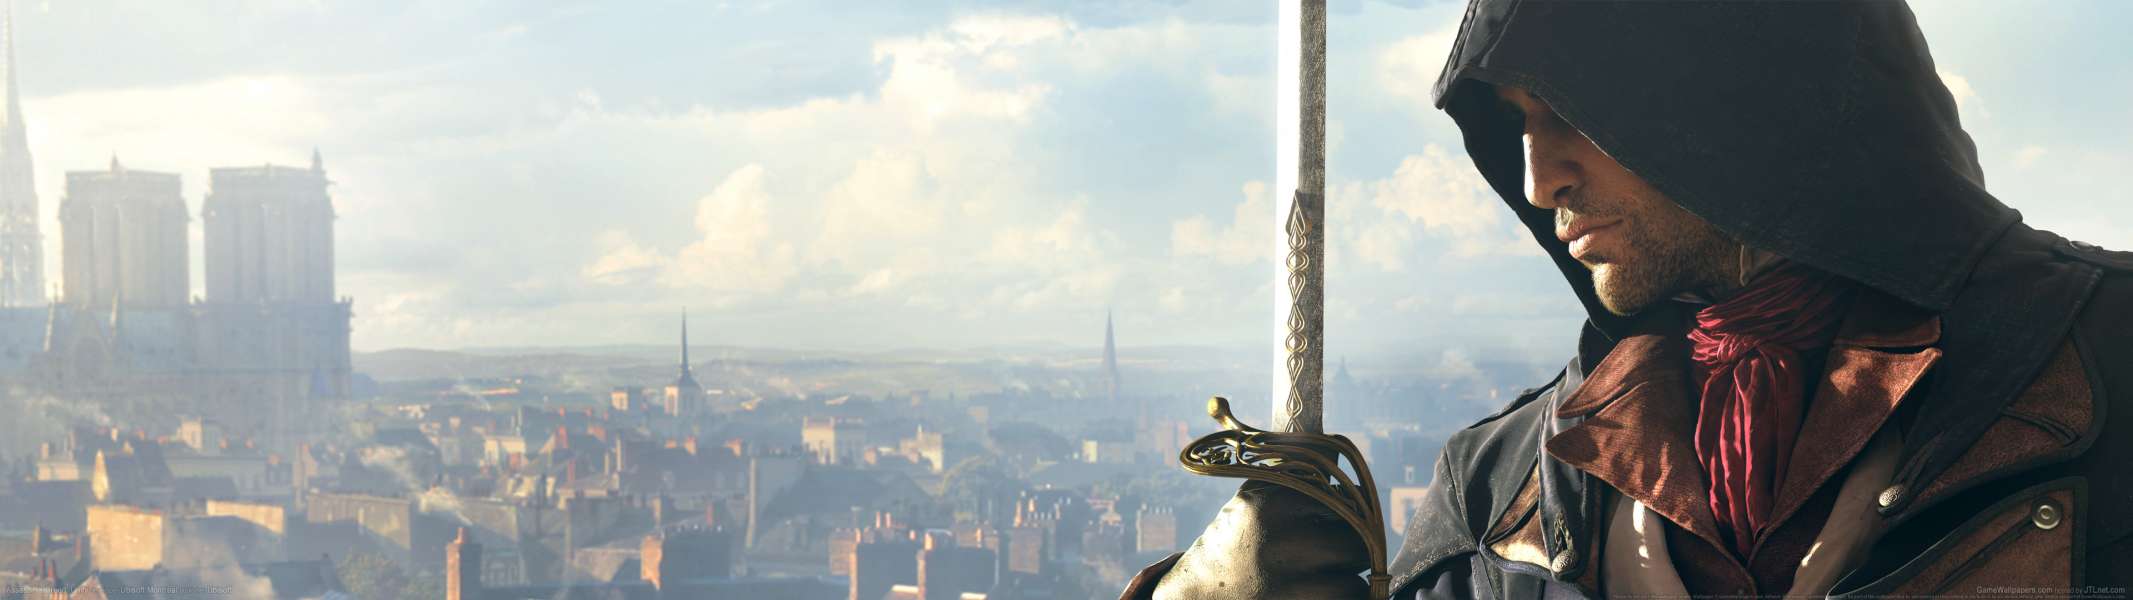 Assassin's Creed: Unity dual screen achtergrond